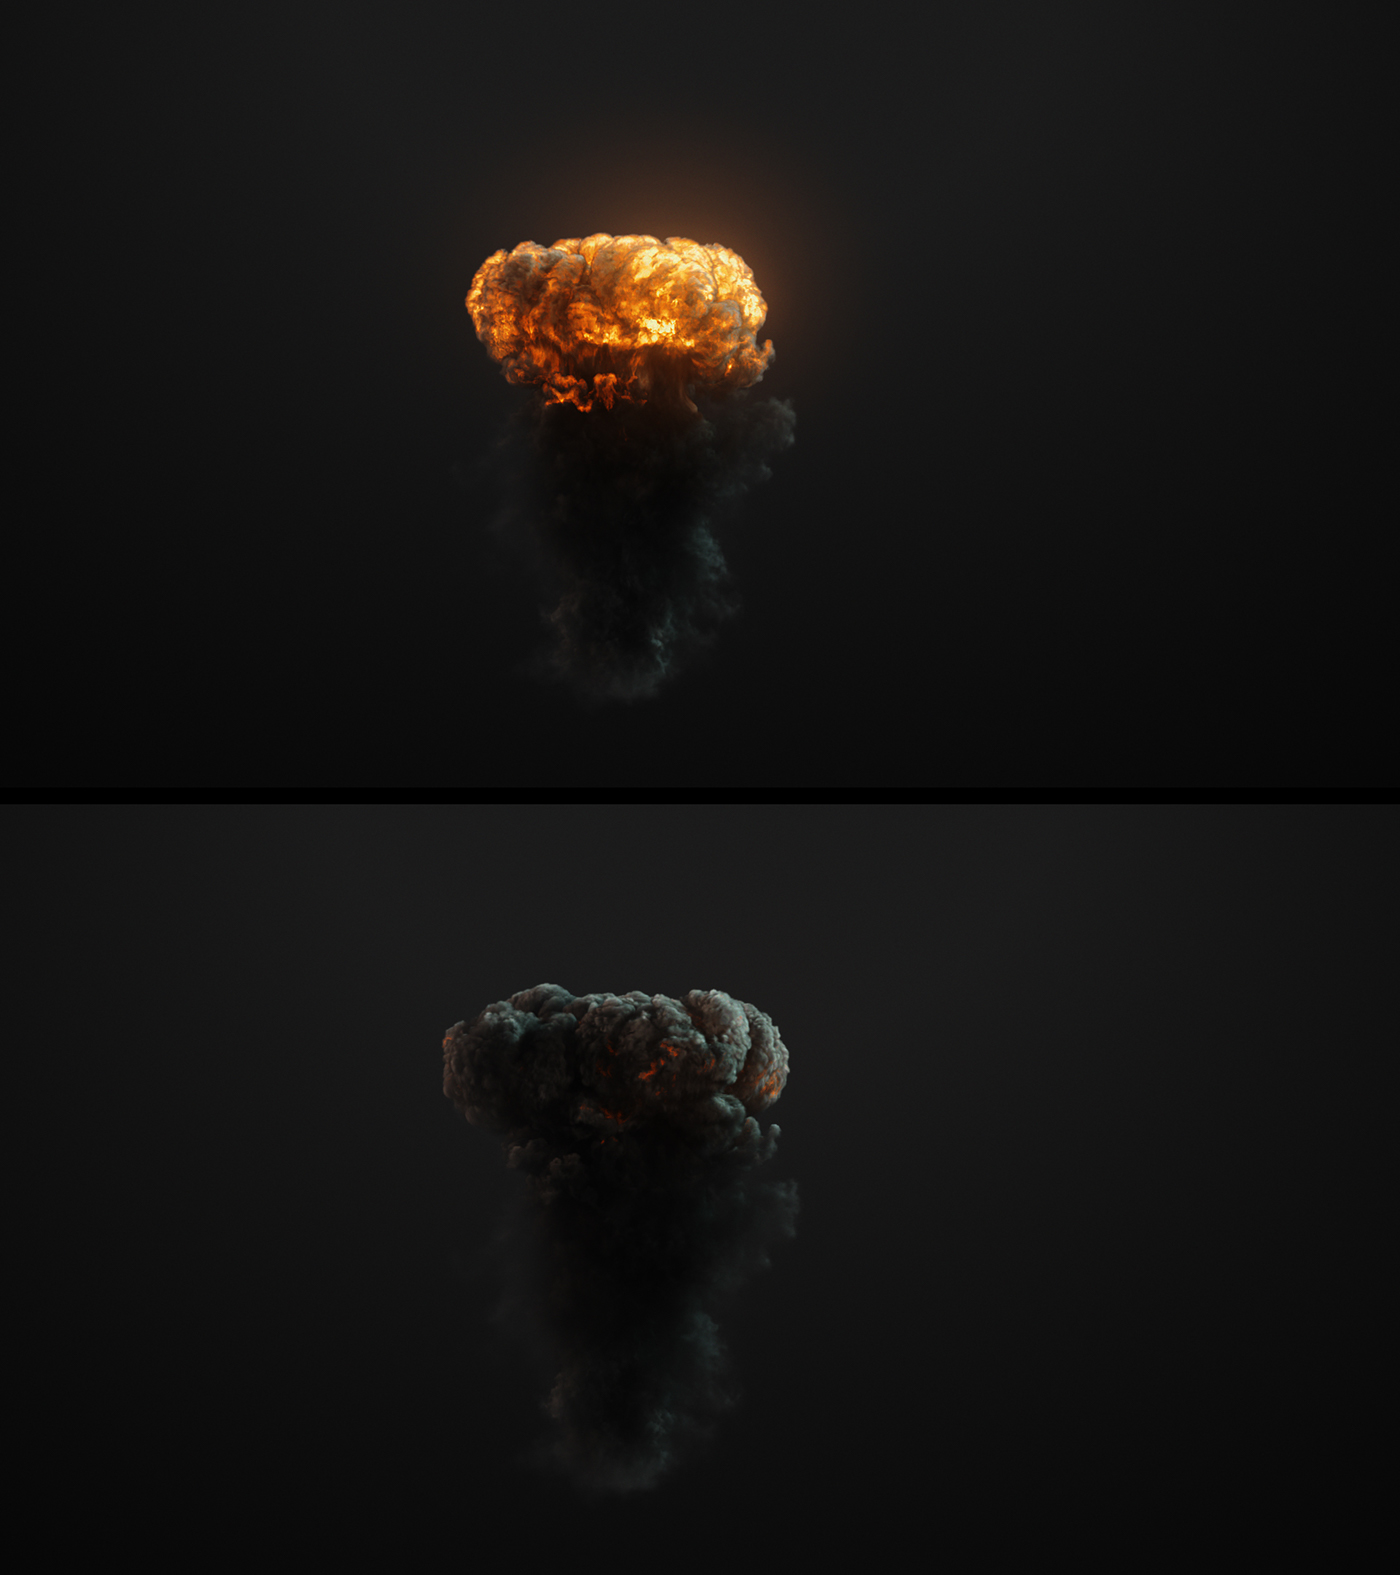 vray 3dsmax after effects photoshop modeling texturing lighting rendering compositing Fluid Simulation FumeFX Zbrush explosion vfx